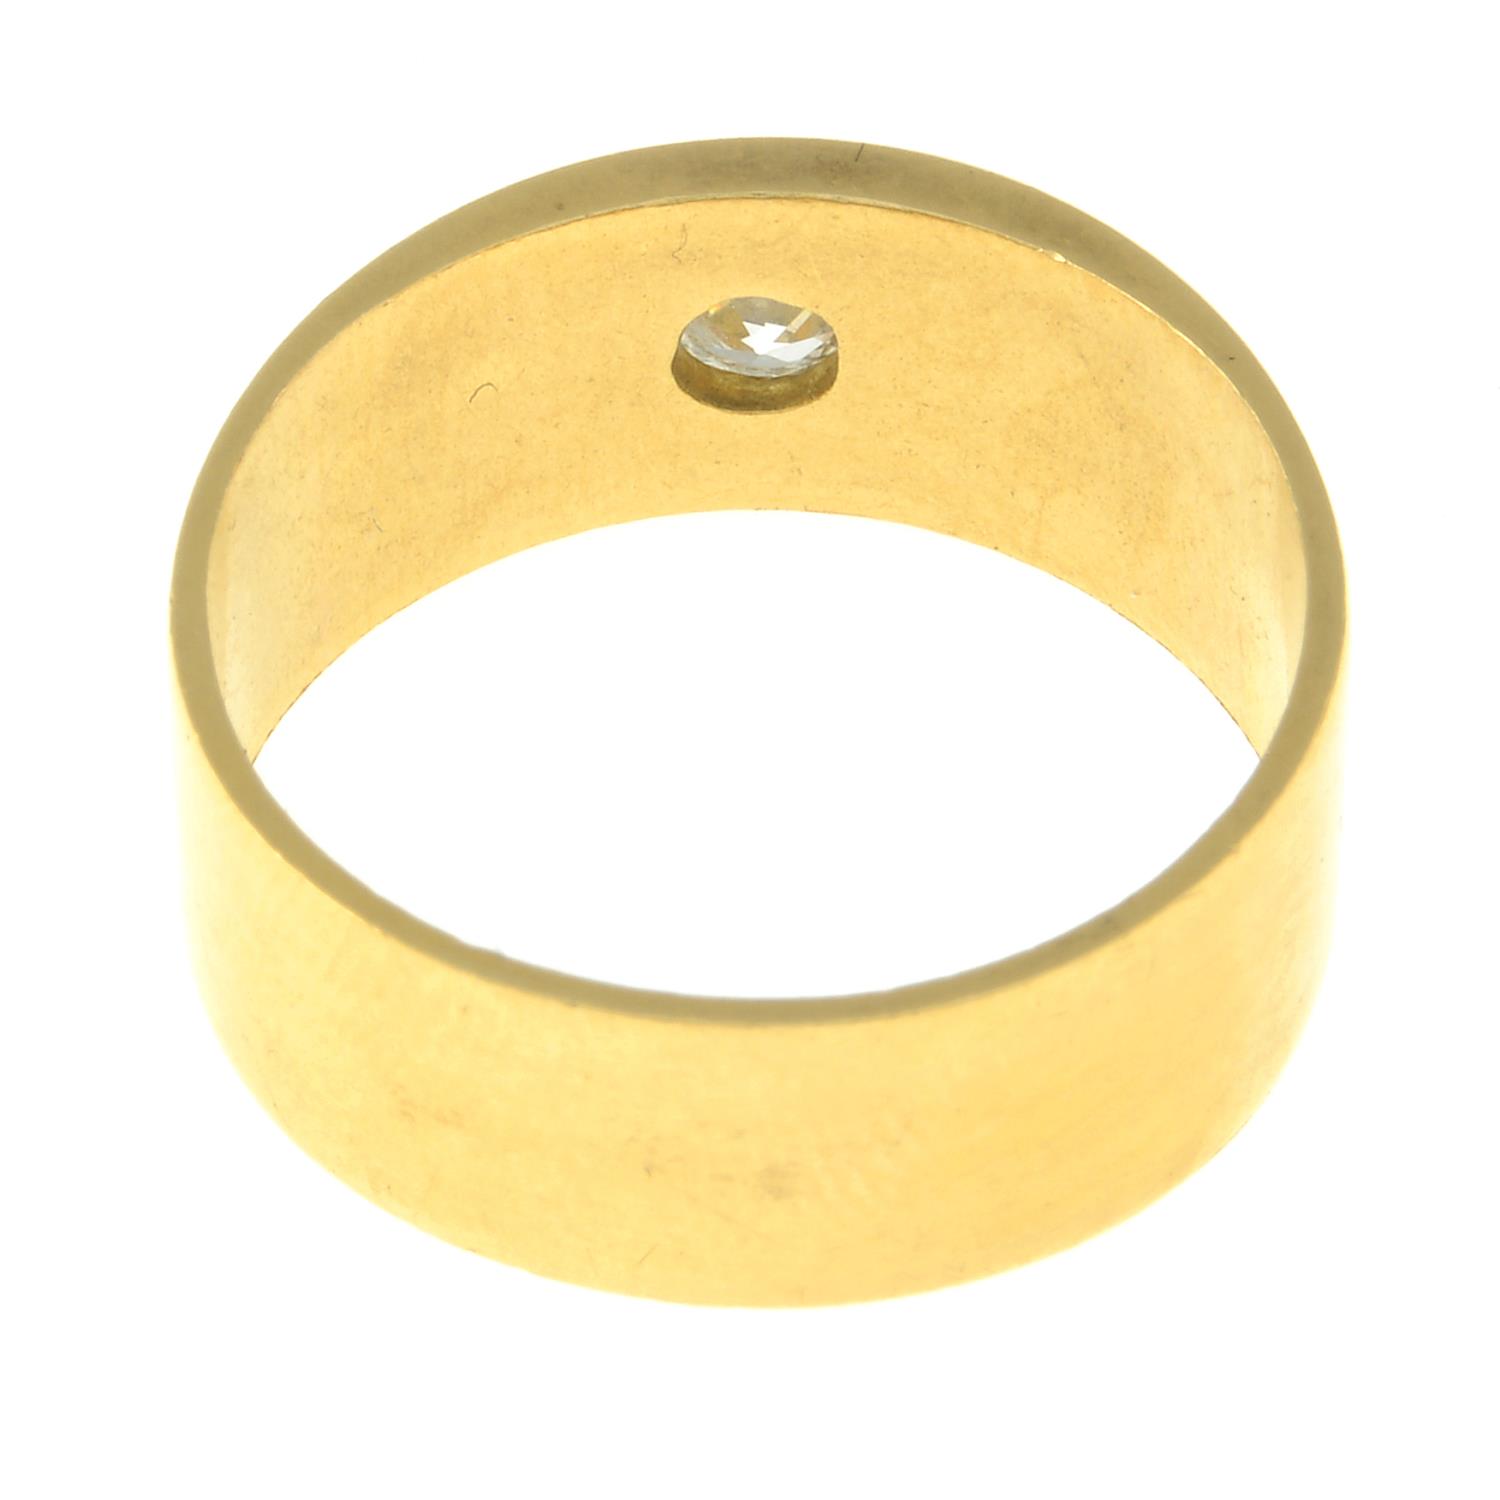 An early 20th century 18ct gold circular-cut diamond band ring.Estimated diamond weight 0.20ct, - Image 2 of 2